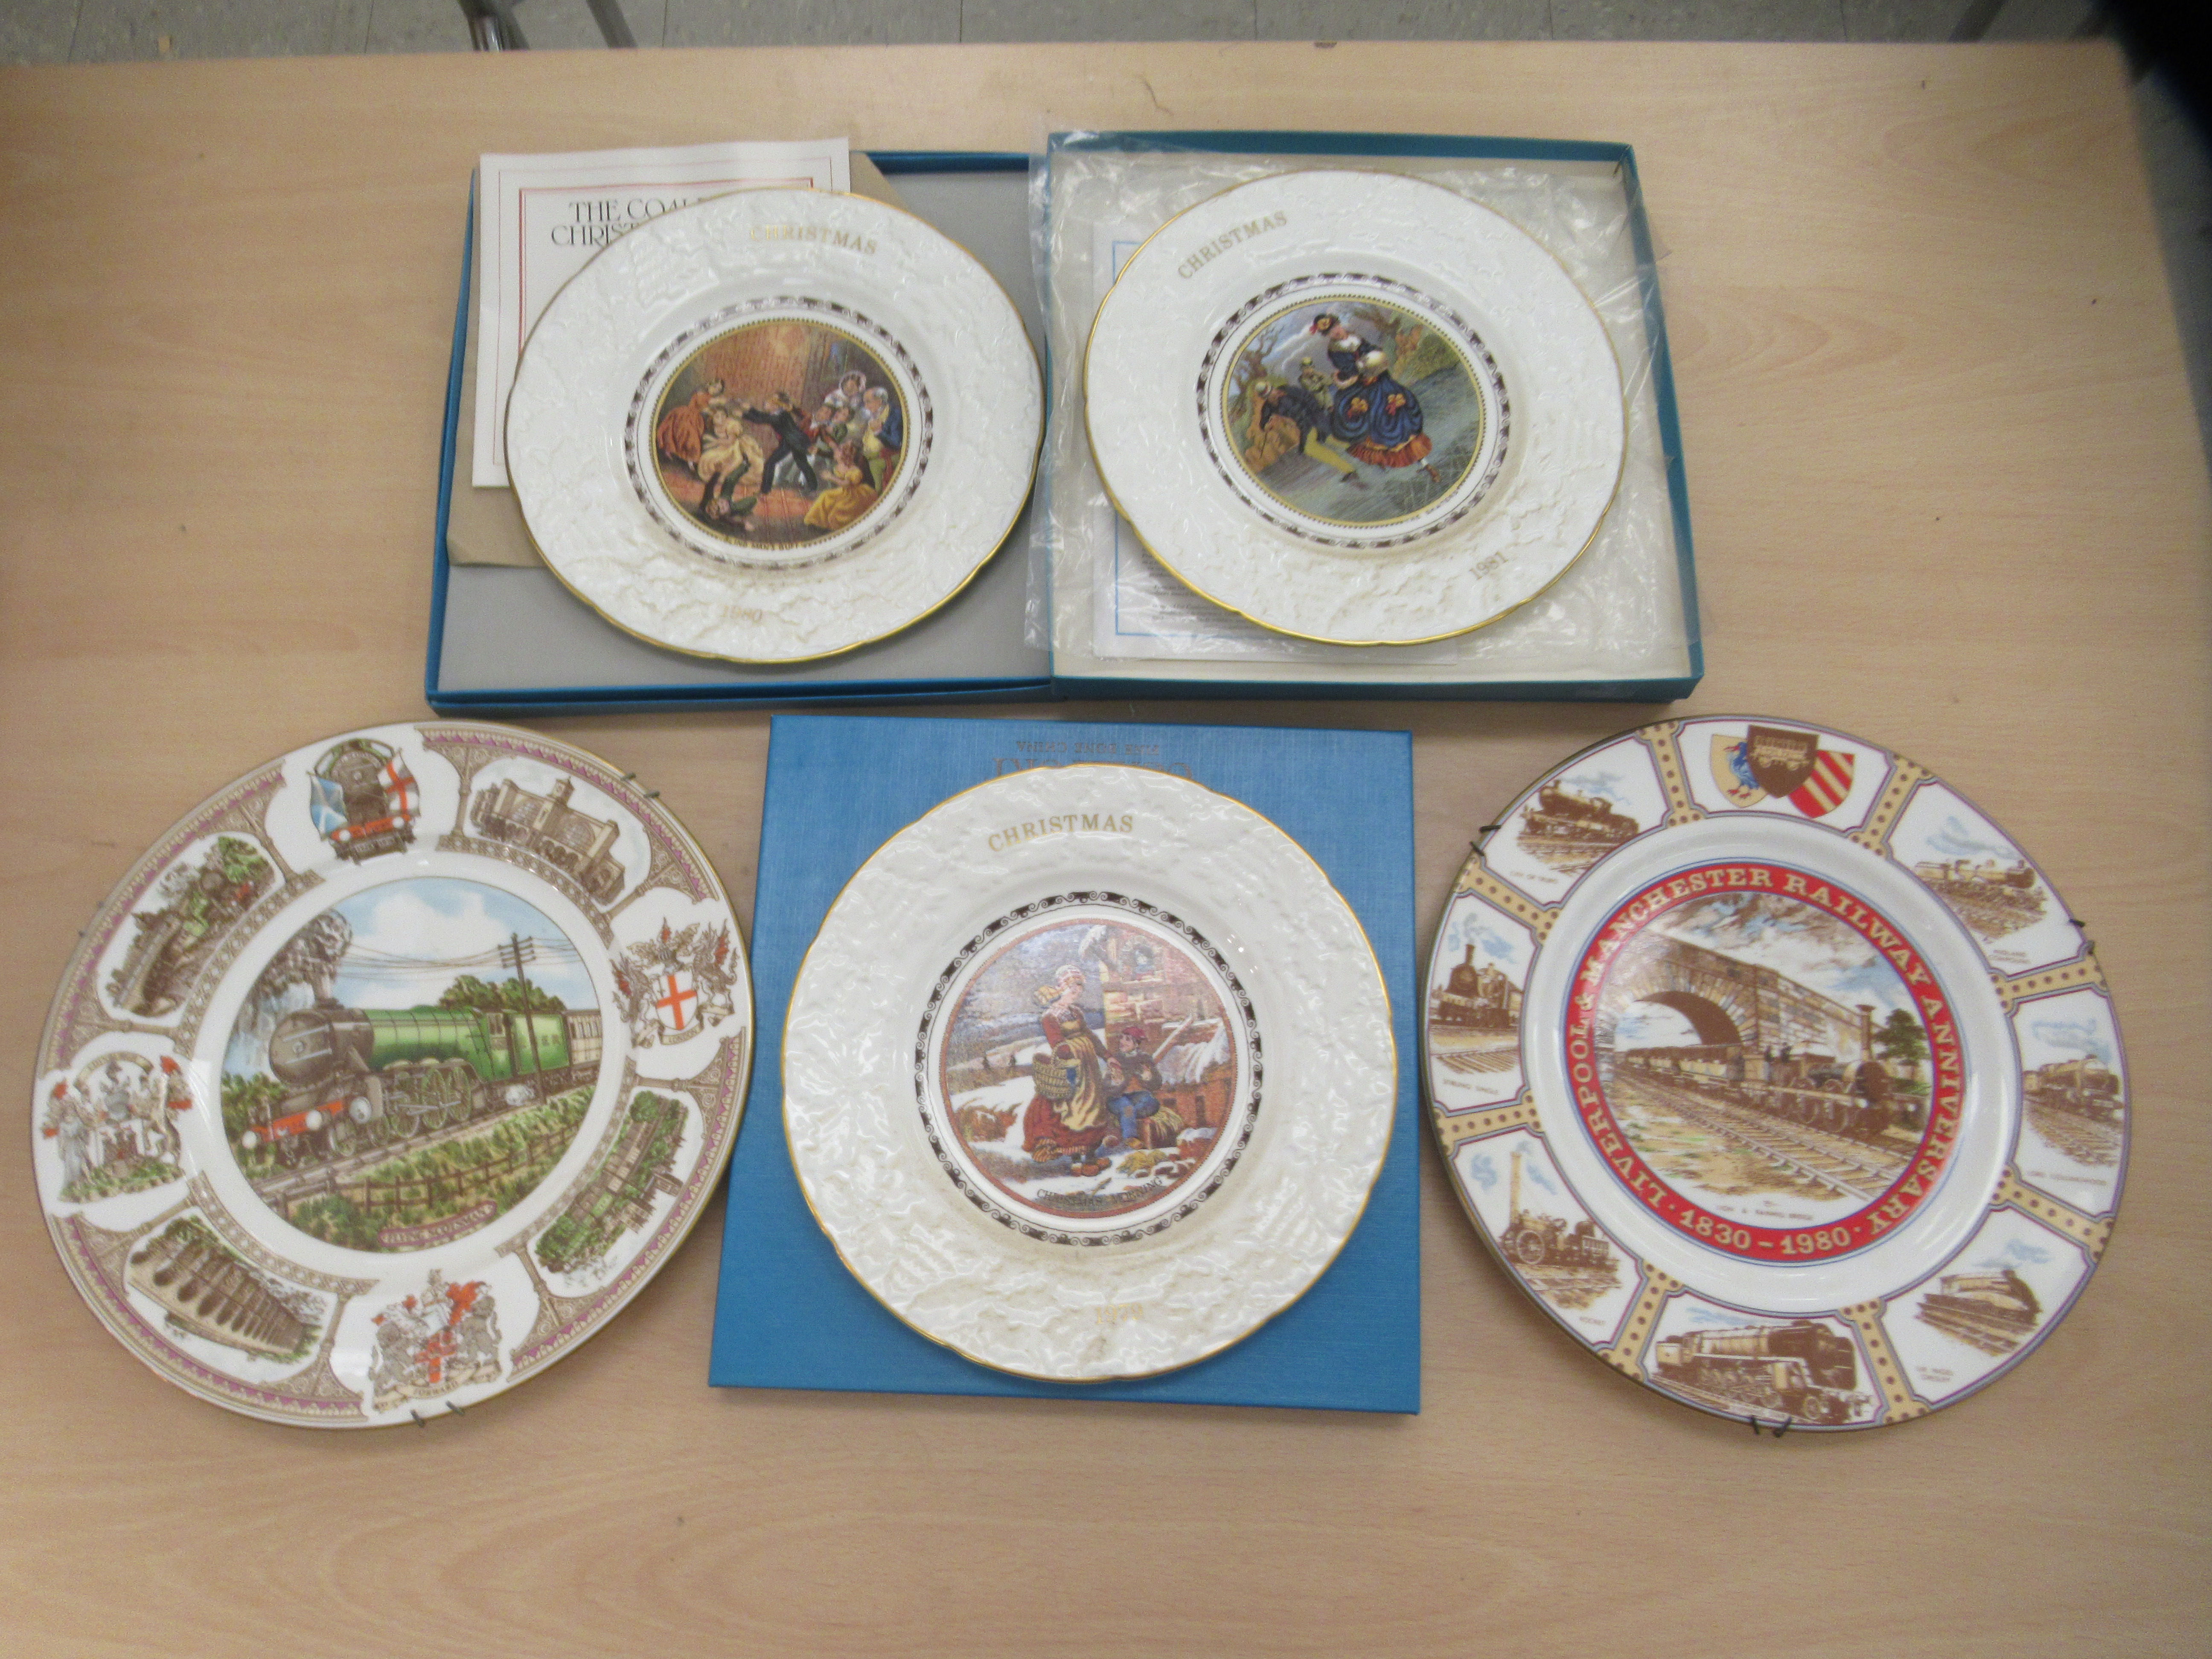 Decorative ceramics, mainly plates with examples by Coalport and Royal Doulton  9"-11"dia  some - Image 4 of 5